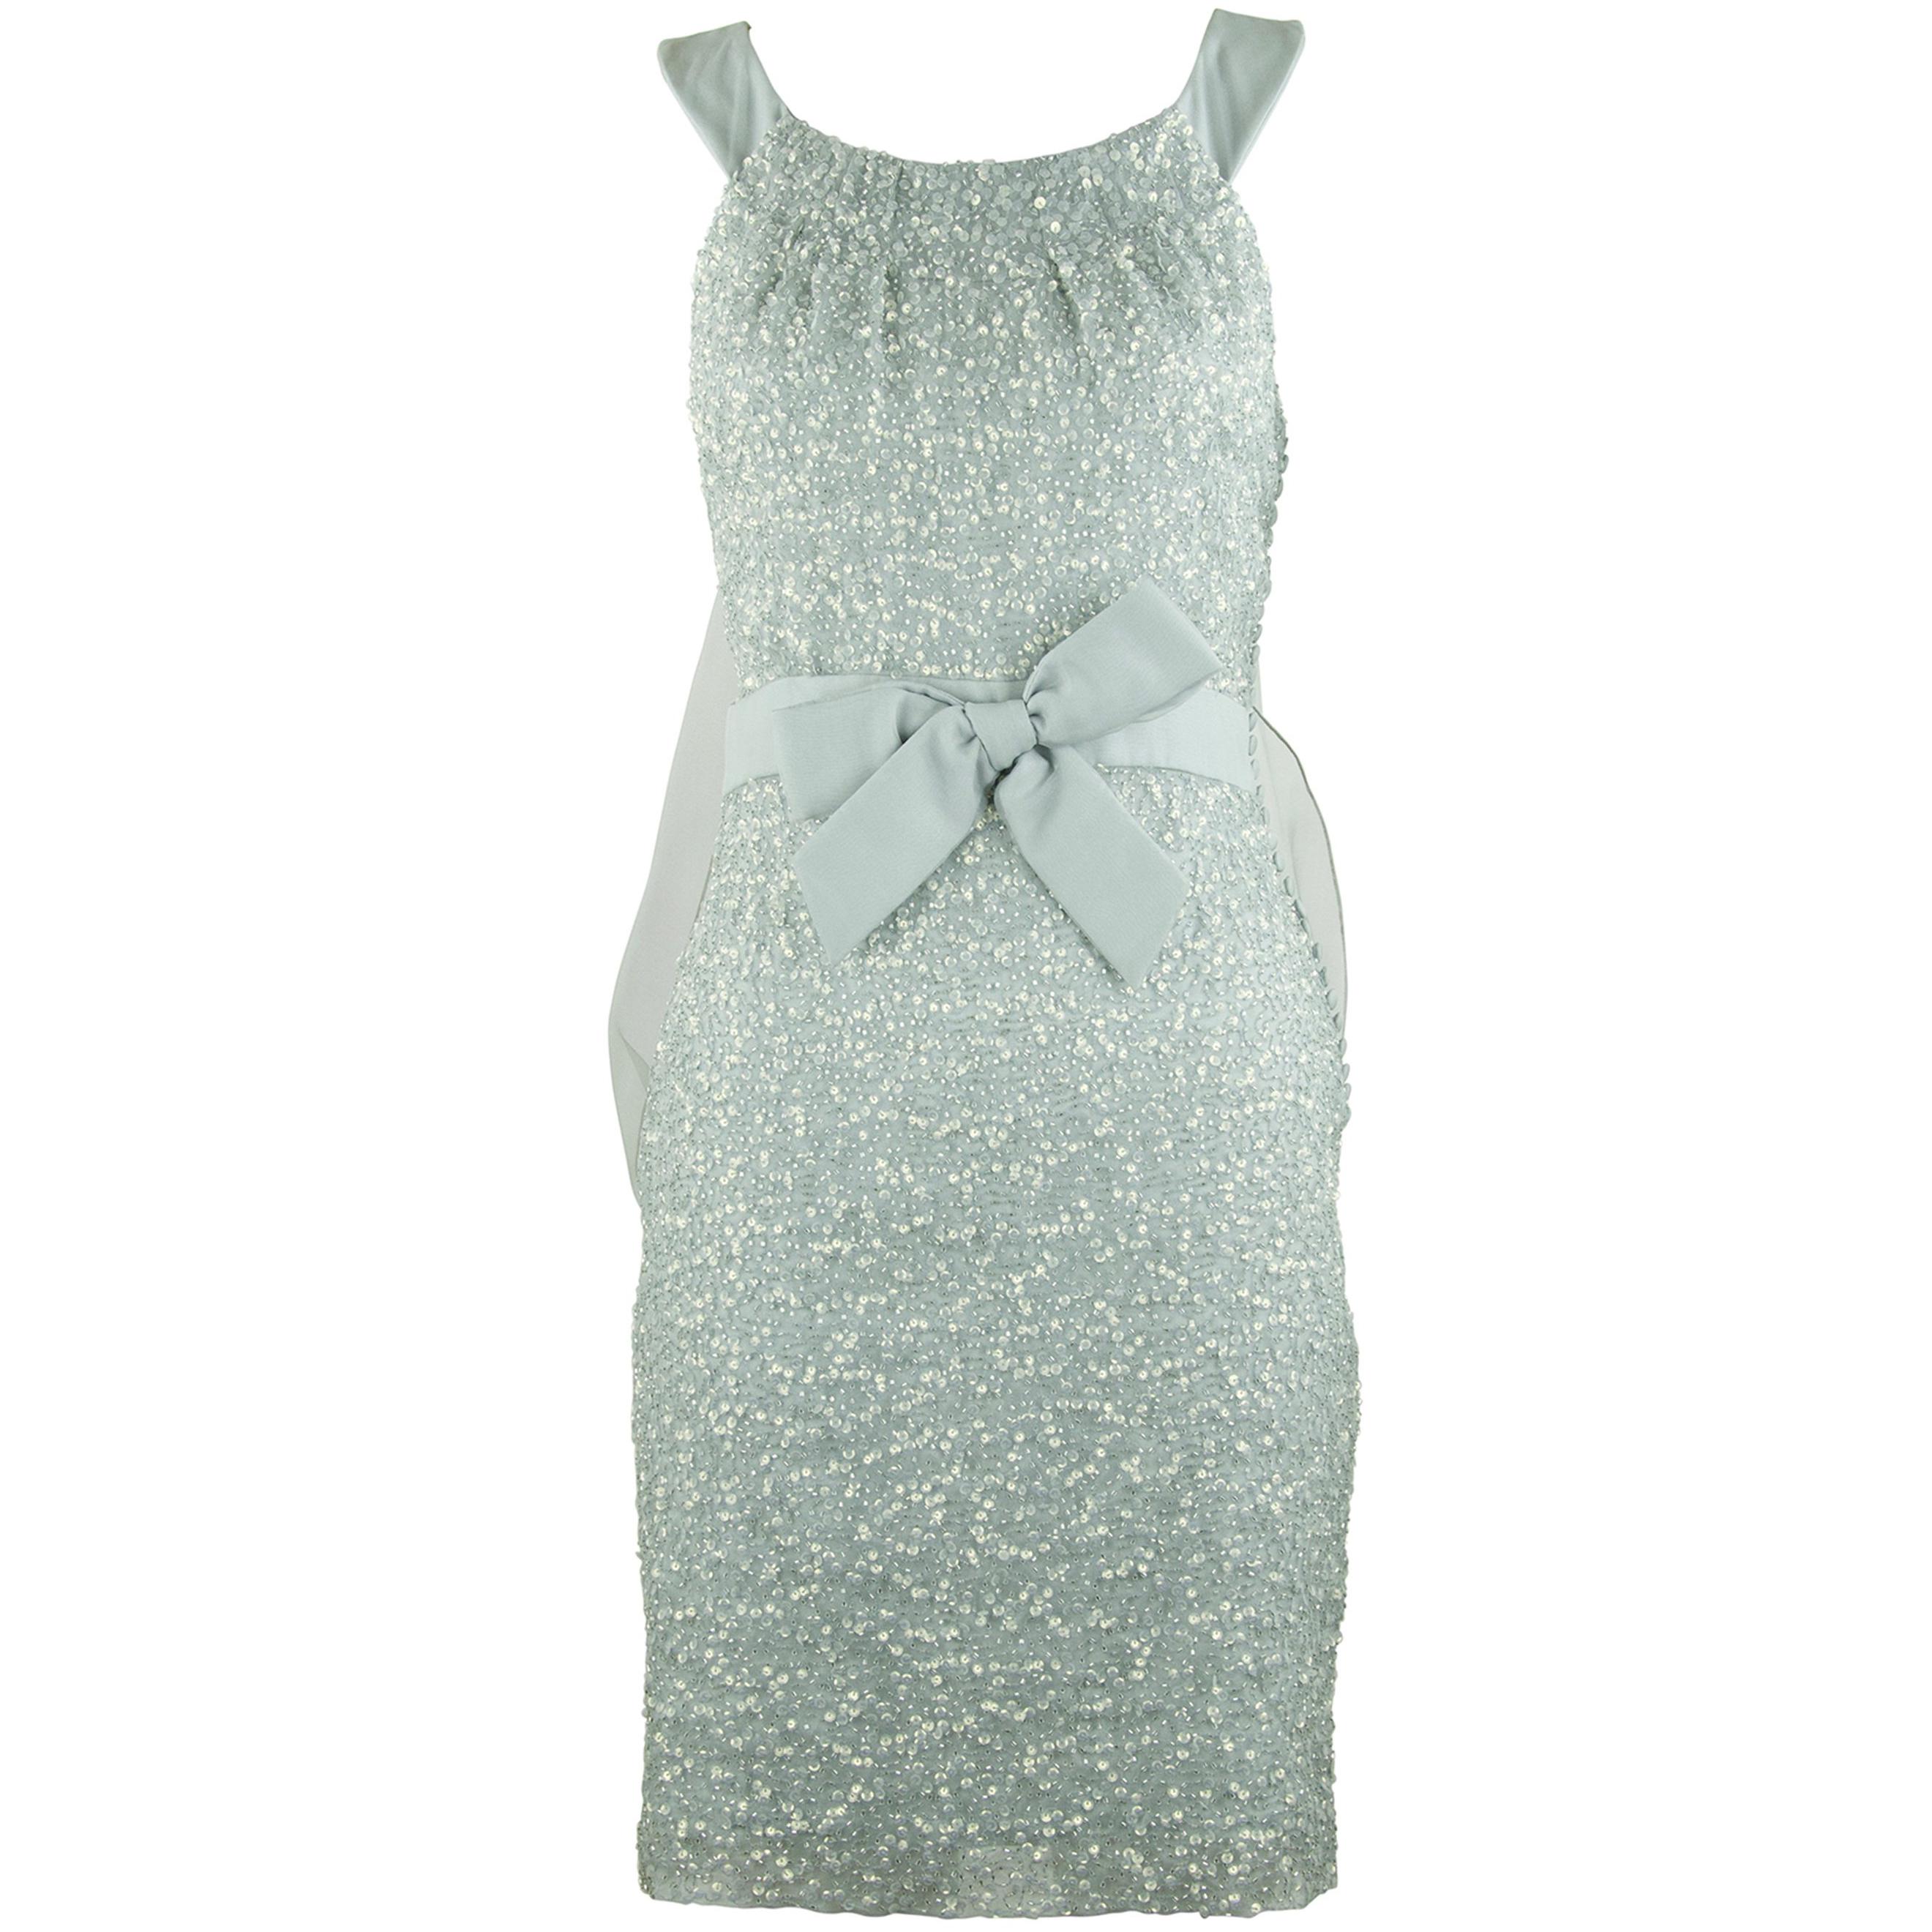 Christian Dior Silver Sequin Dress with Bows - Size FR 32 For Sale